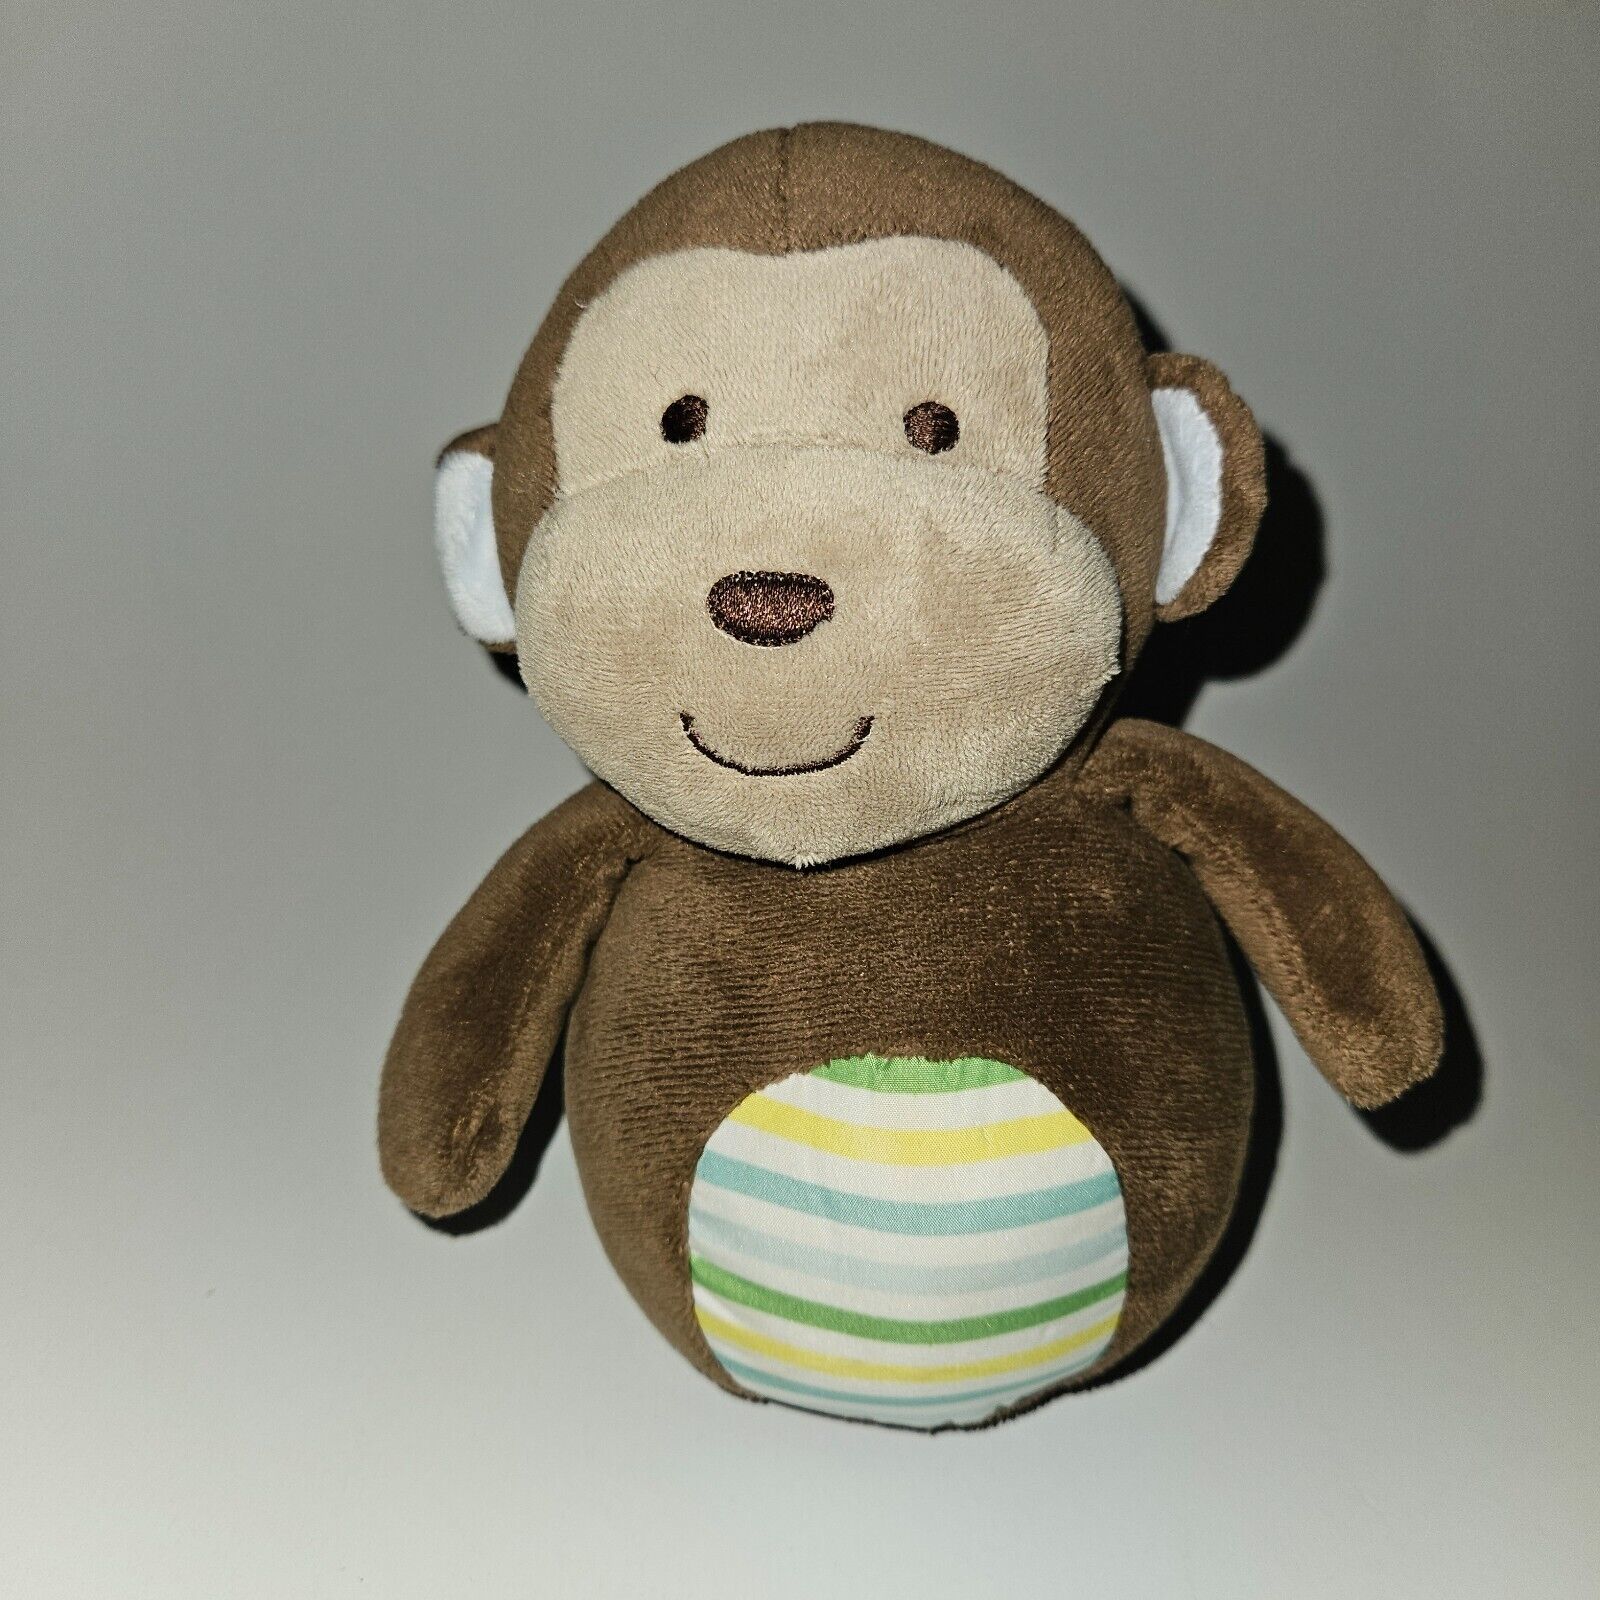 Carter's Monkey Plush Weighted Rattle Chime Wobble Blue Ears Yellow Stripes 2015 - $34.60